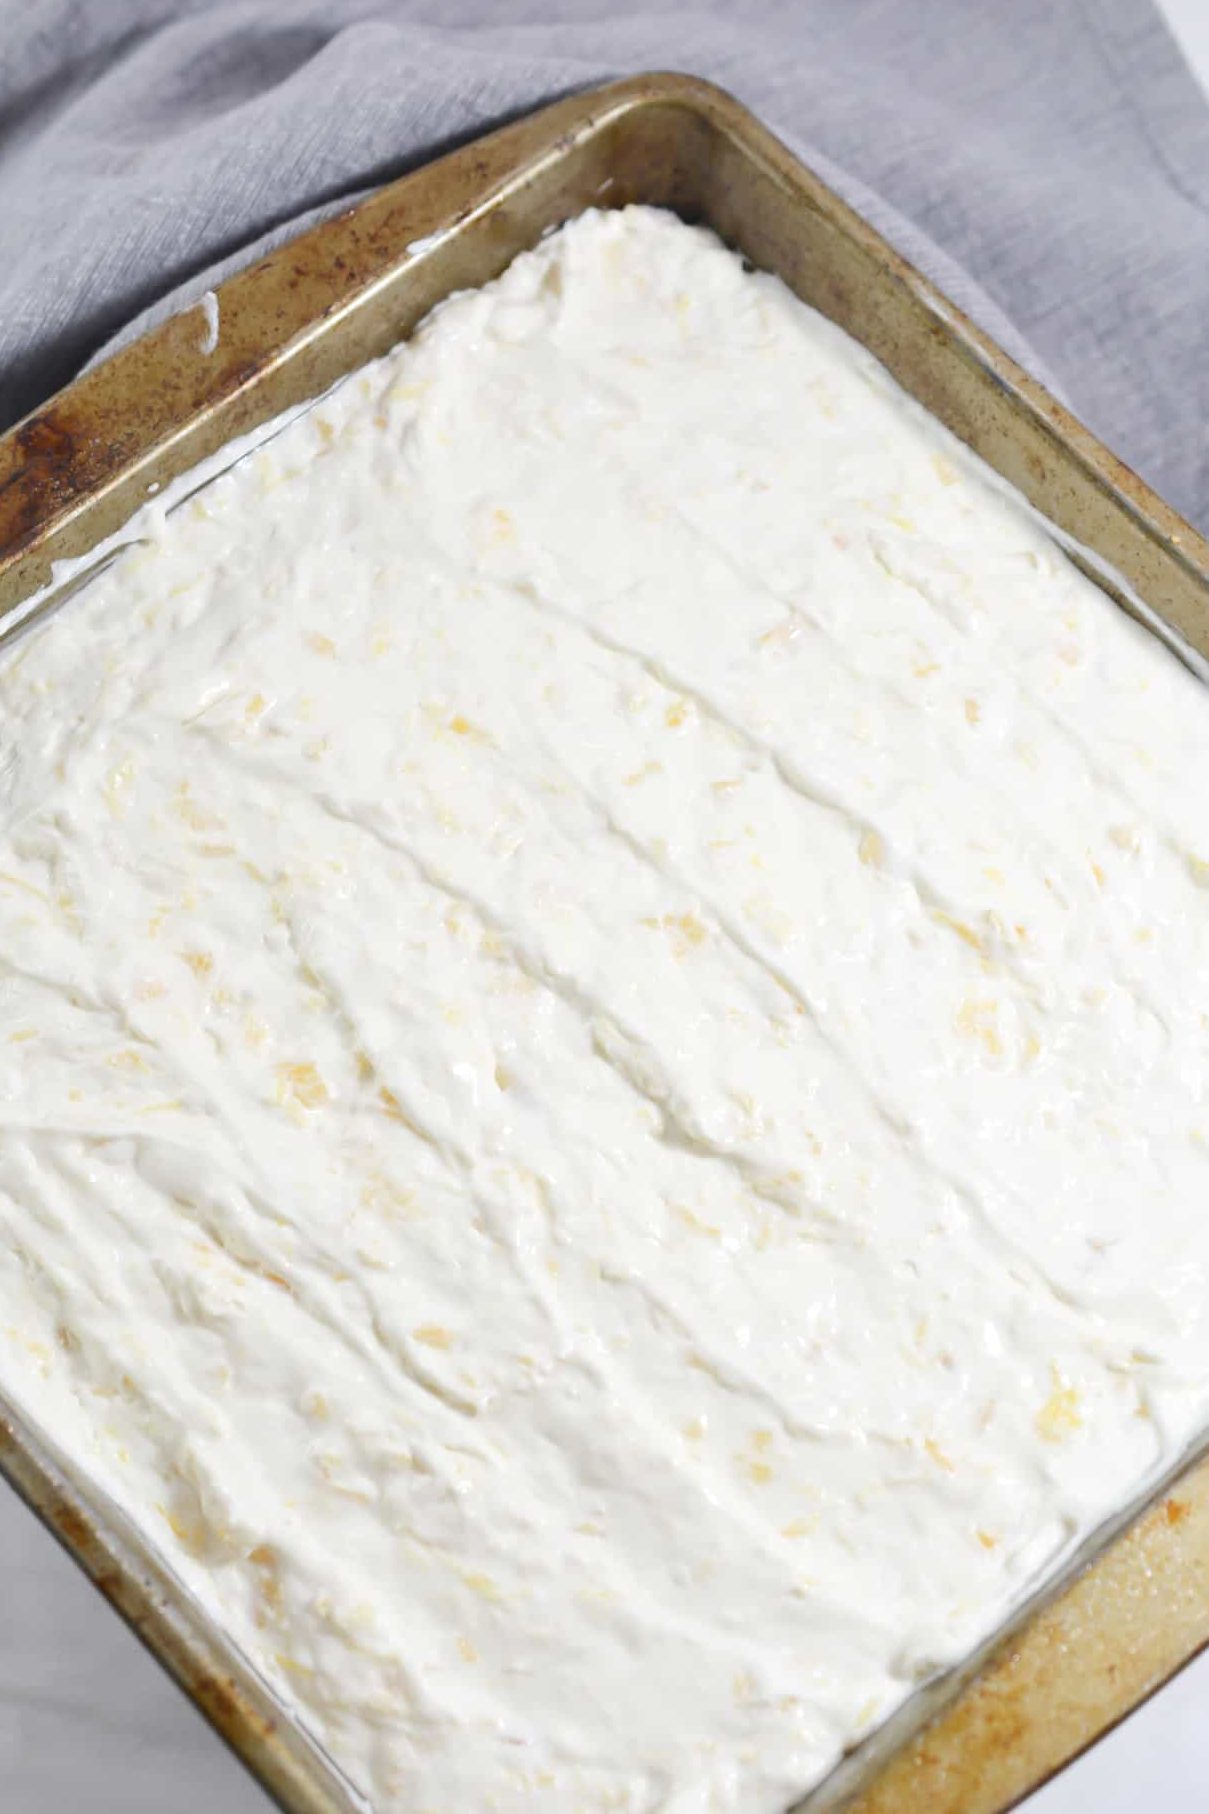 Spread the mixture into the baking dish over the crust.